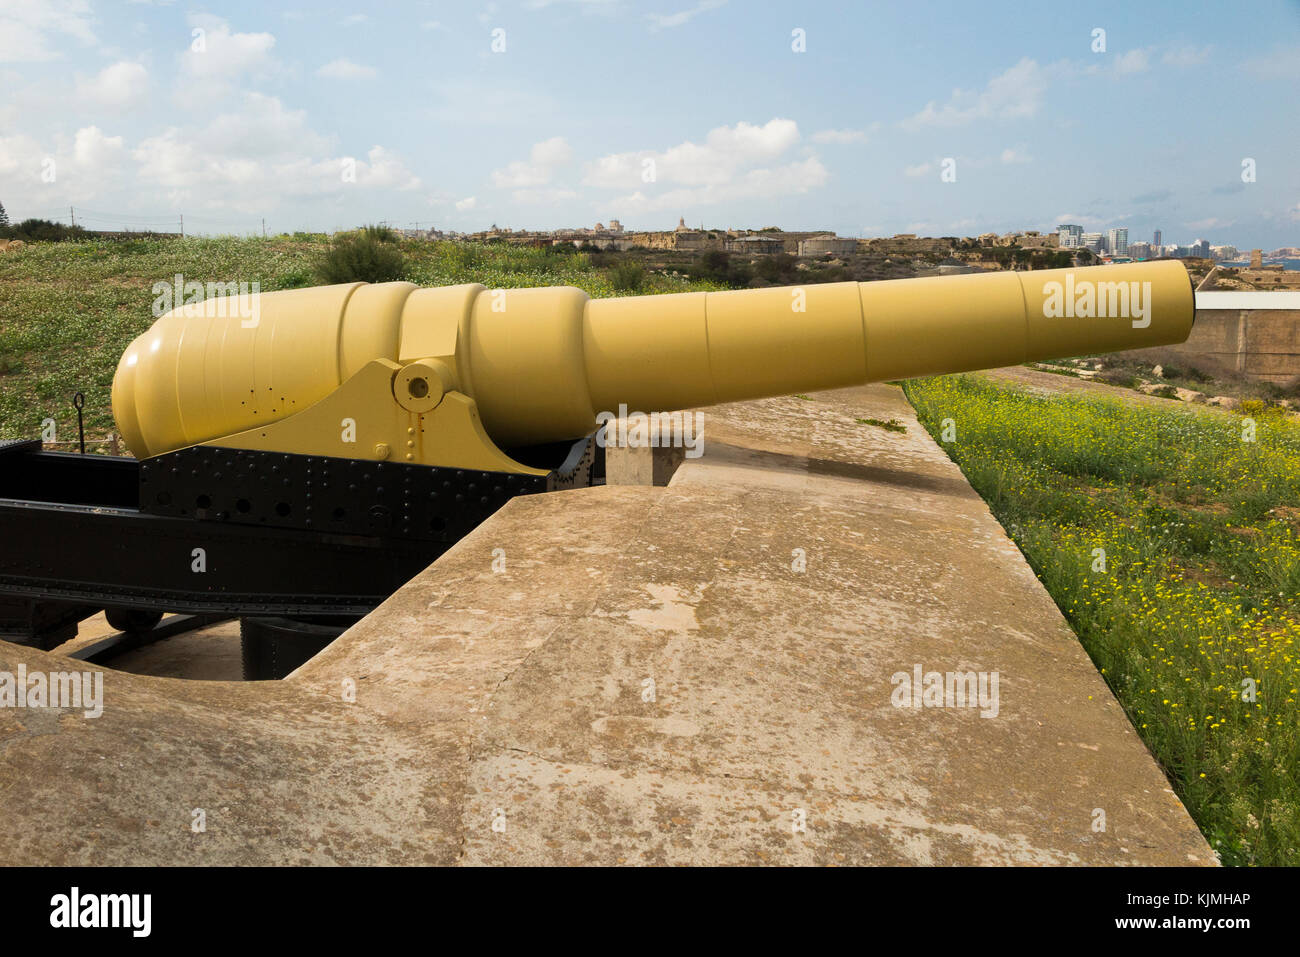 The Armstrong 100 ton gun at Fort Rinella, The muzzle loading 100 gun is the largest front loading cannon / gun battery in the world. (91 Stock Photo - Alamy